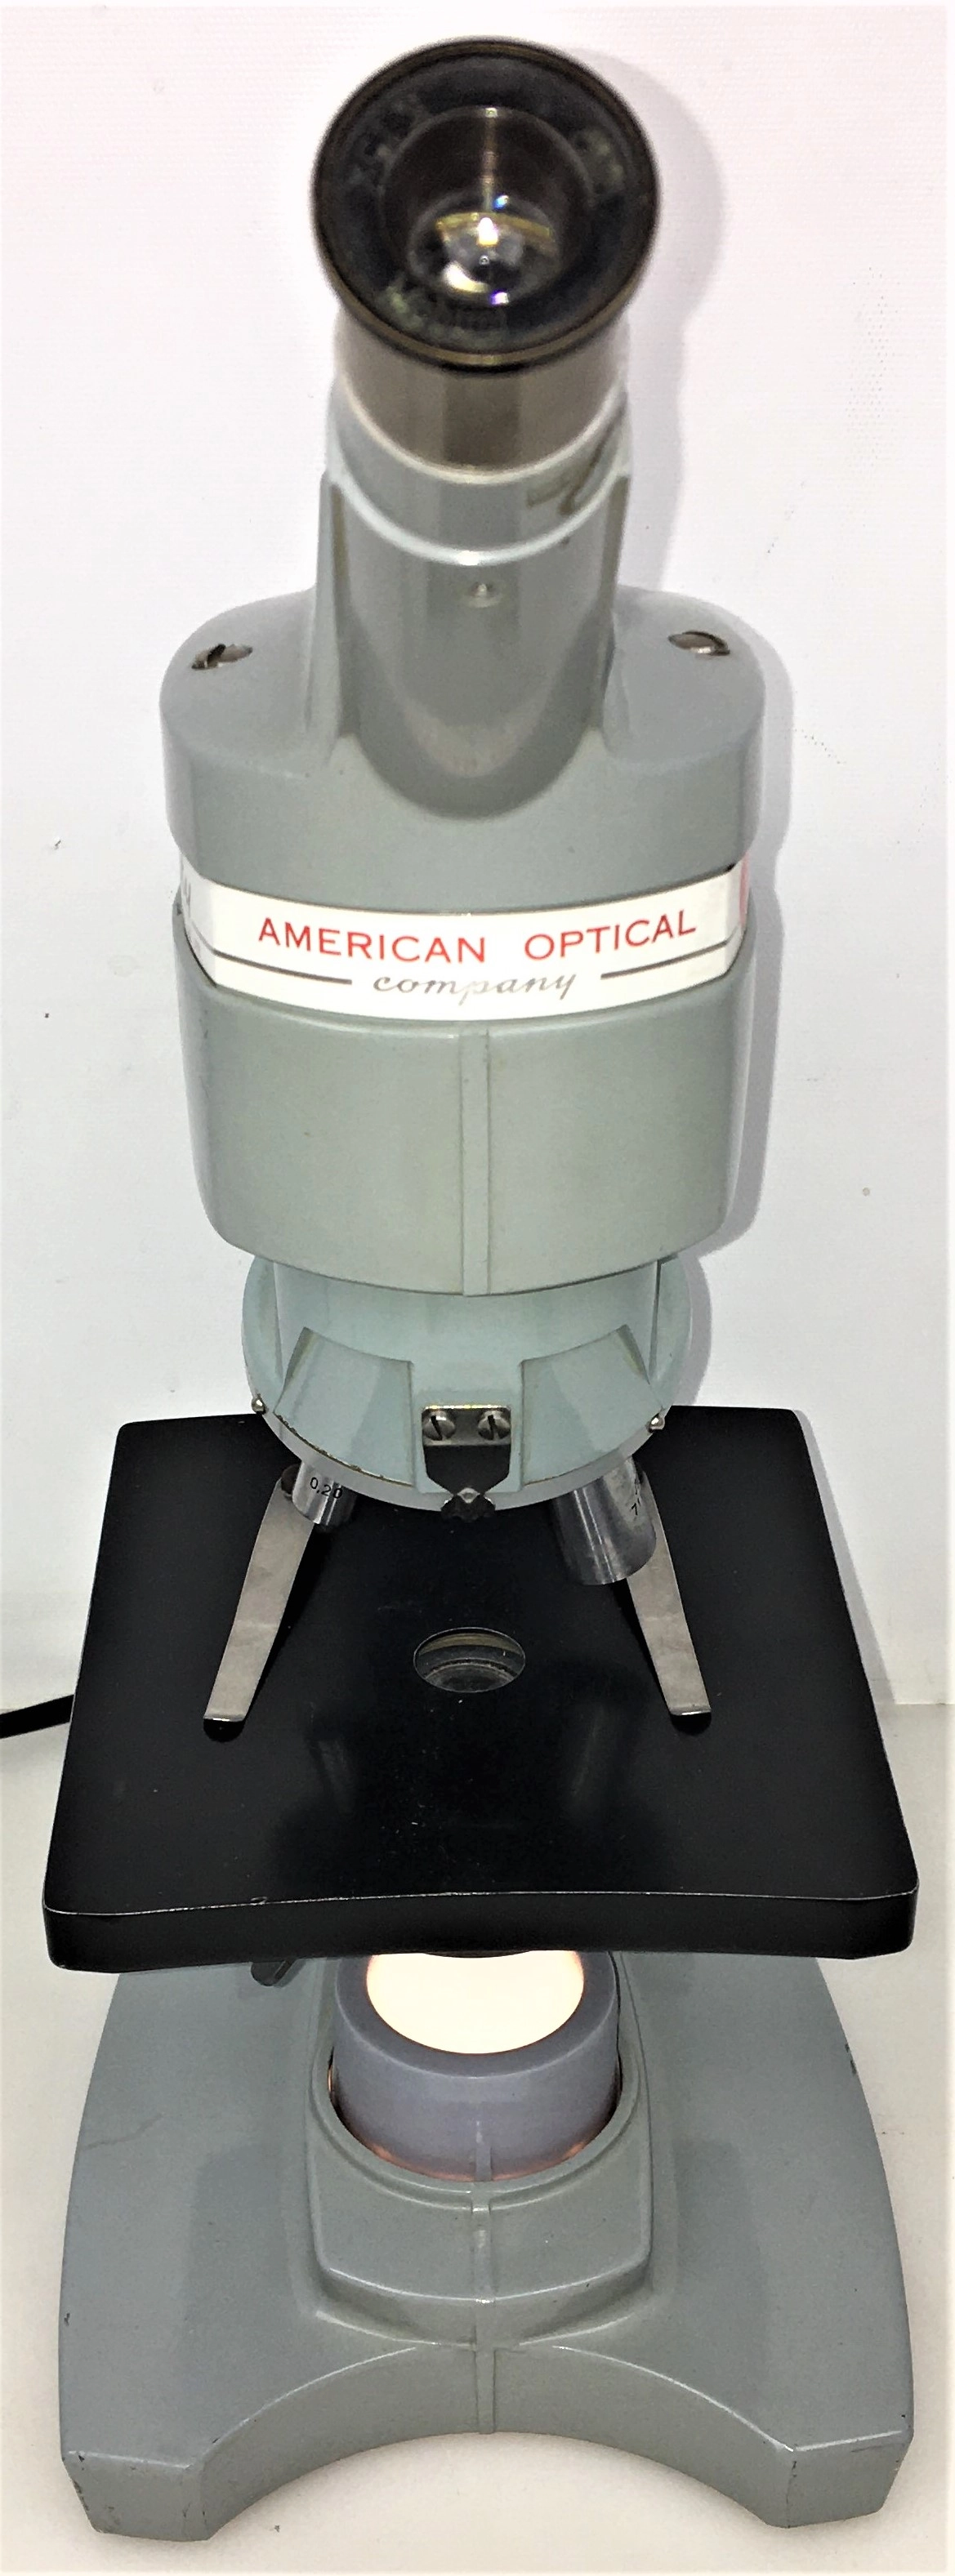 American Optical Spencer Sixty Monocular Microscope (120X to 320X)